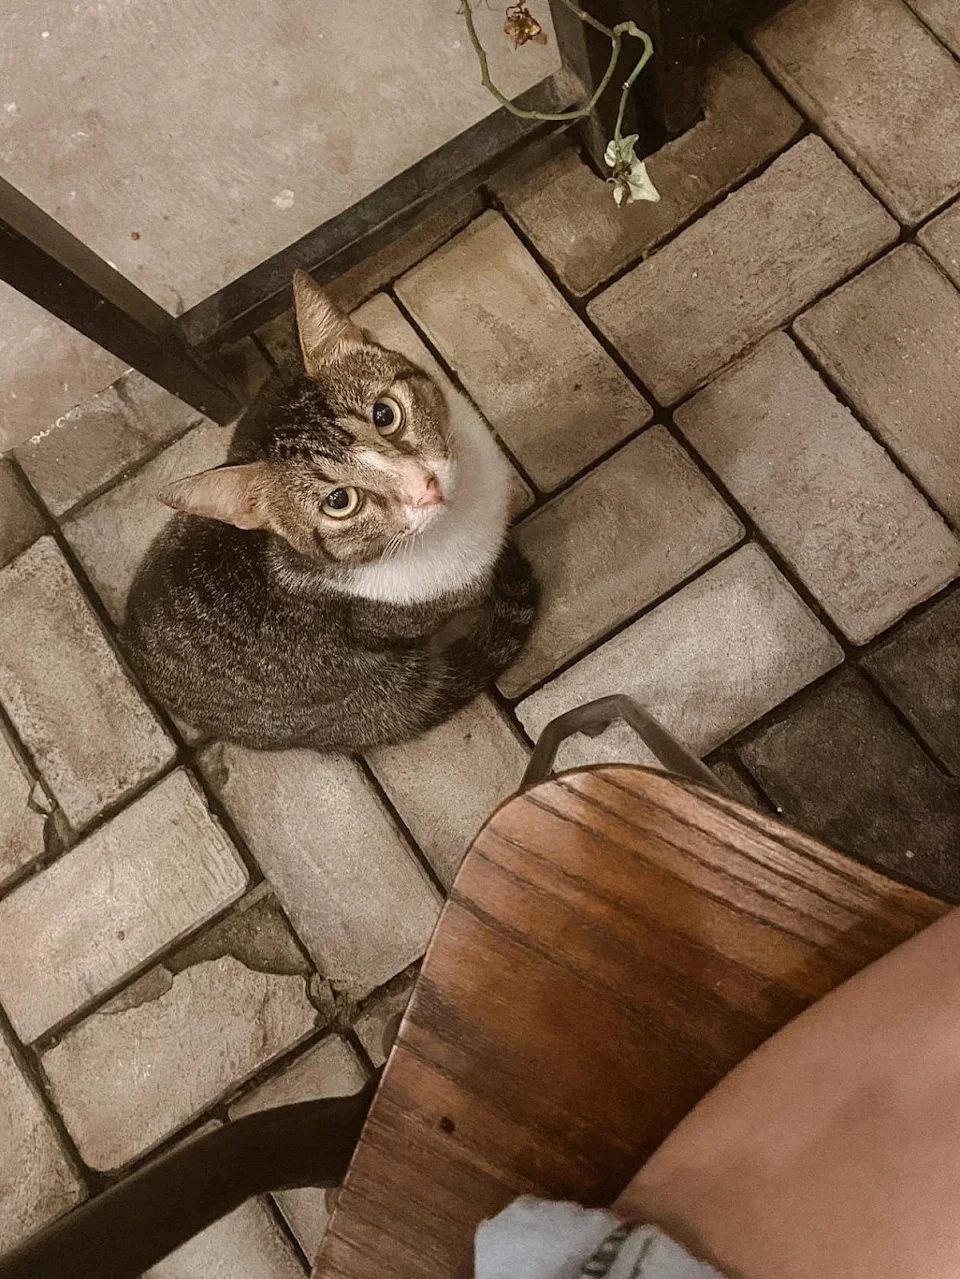 This cute kitty I saw at the café. I gave her some food but she ignored it and walked away...